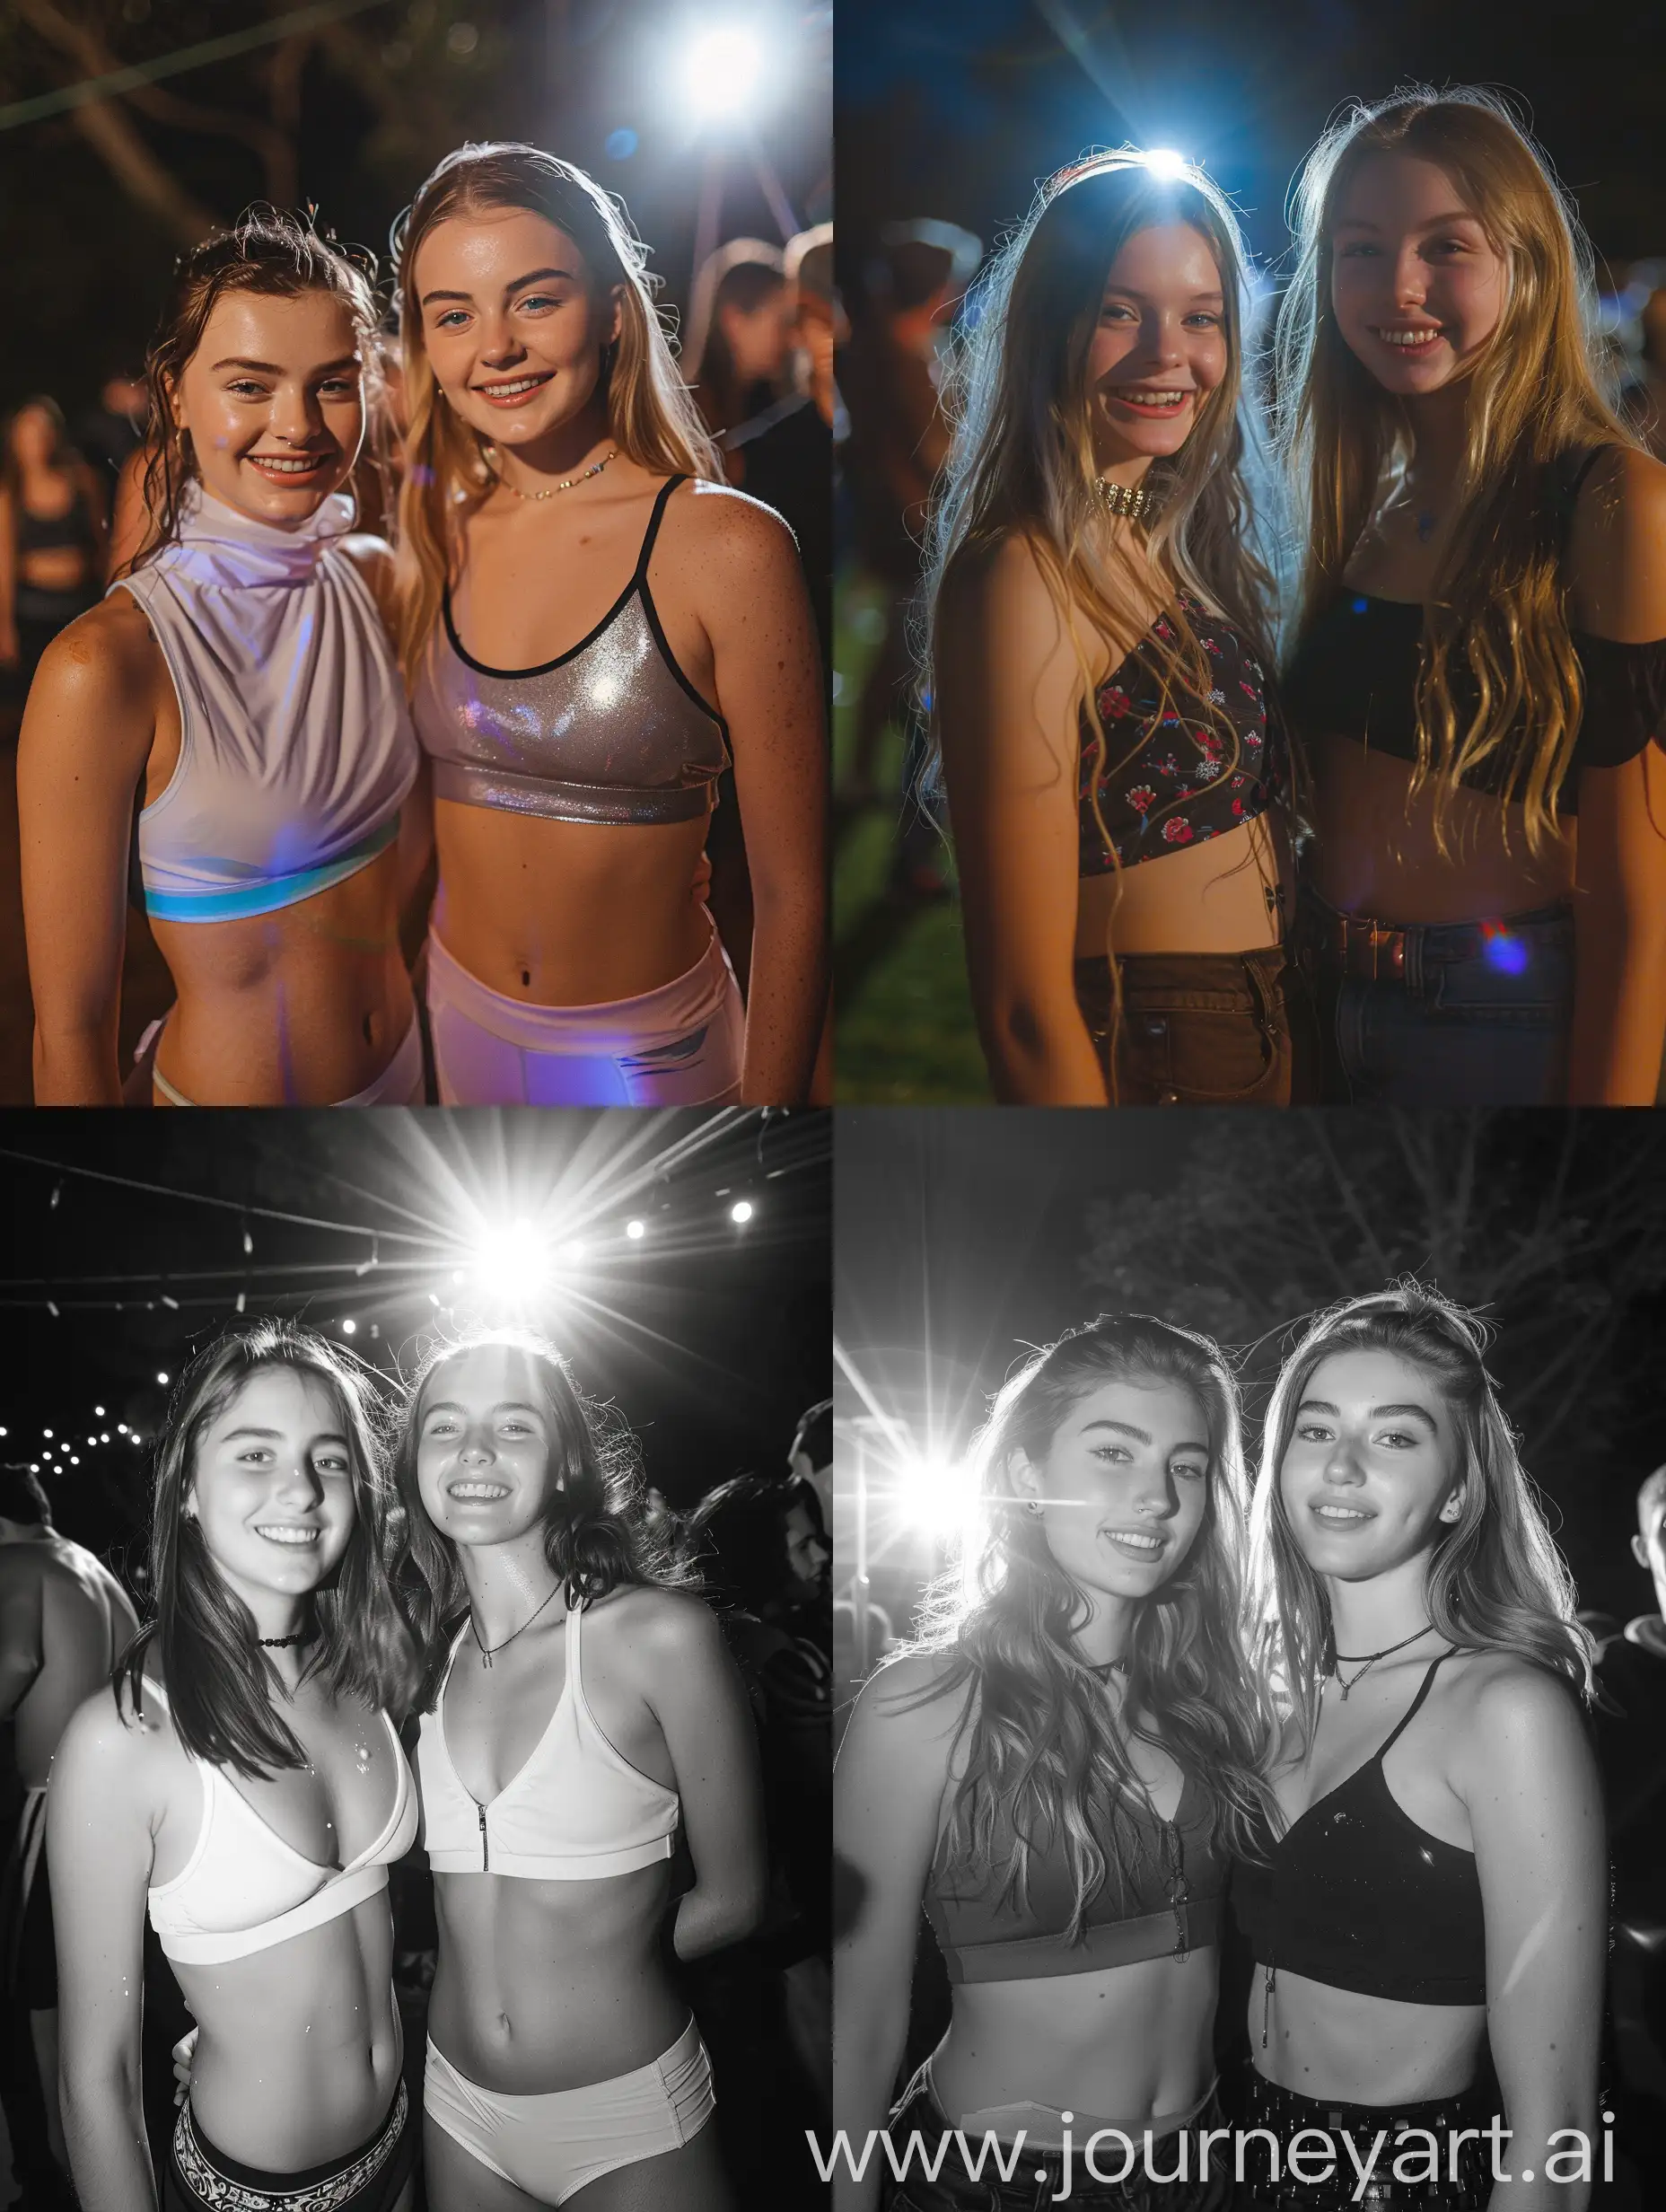 2 young women at the party, 22 years old,  transparent fantasy,   standing, fitness, at night, flash, flash light, smilling